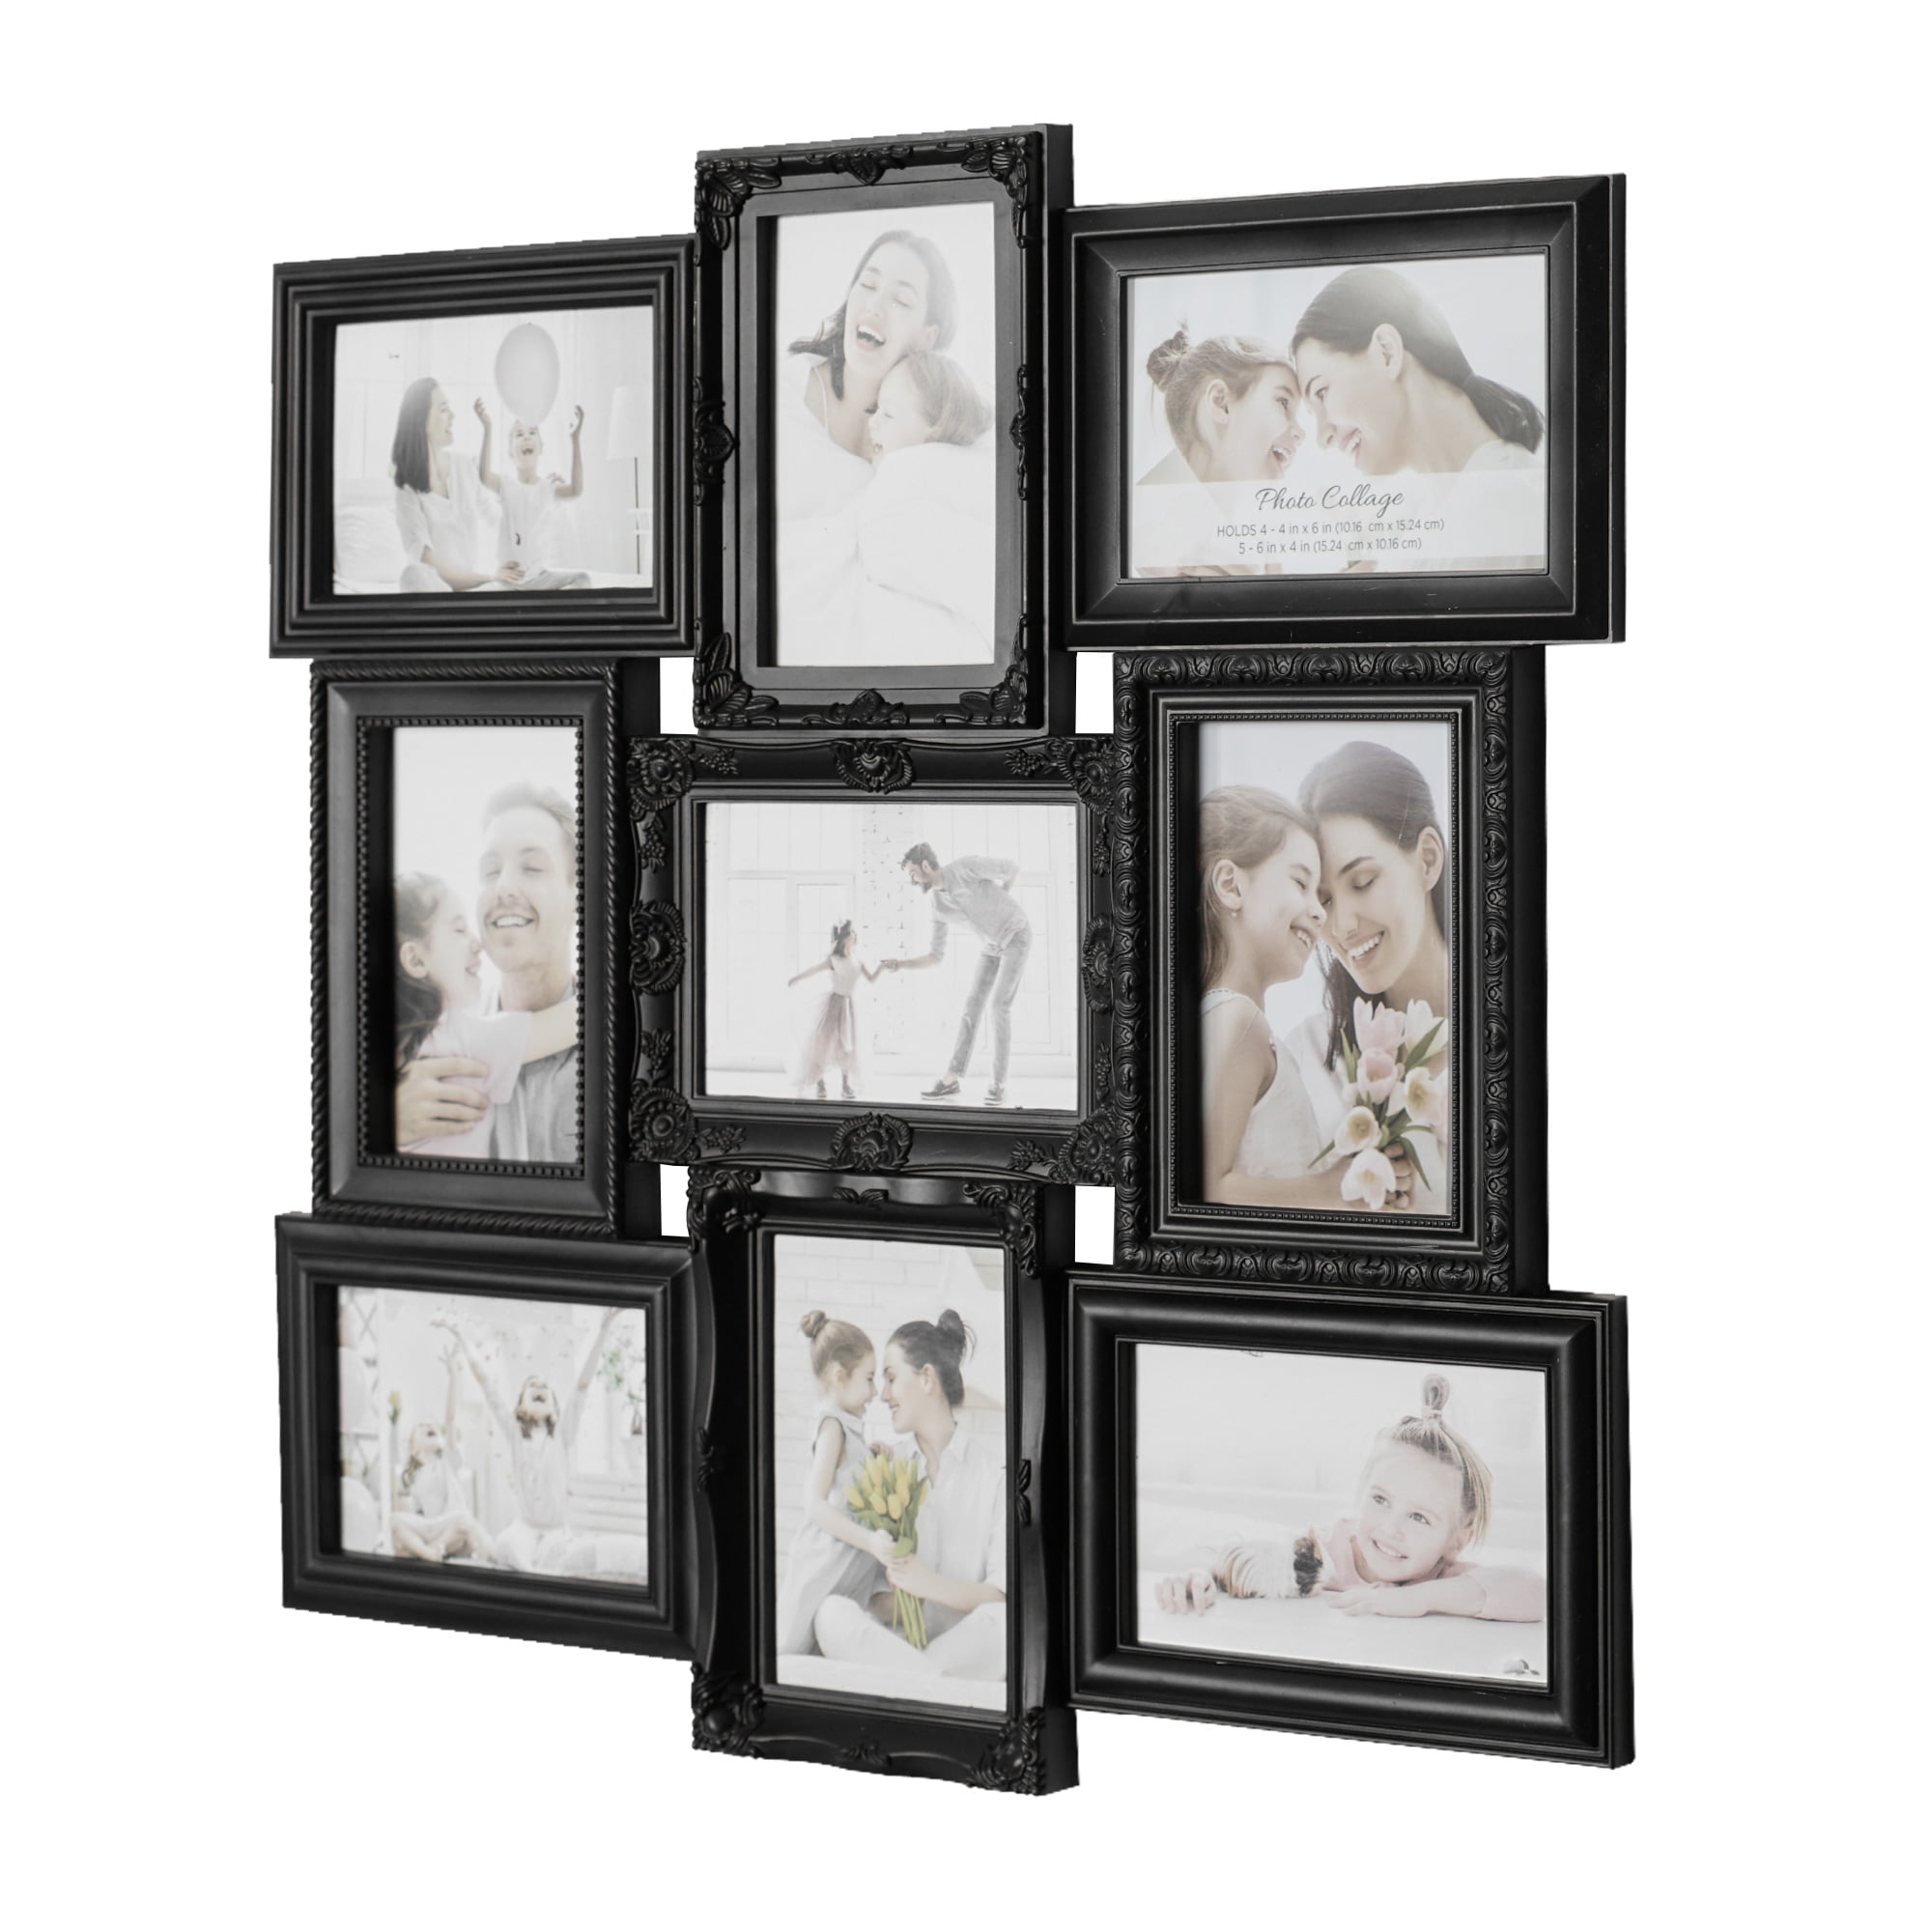 NEW STYLISH PHOTO PICTURE FRAME HOLDS 12 PHOTOS APERTURE MULTI COLLAGE 4” x 6” 